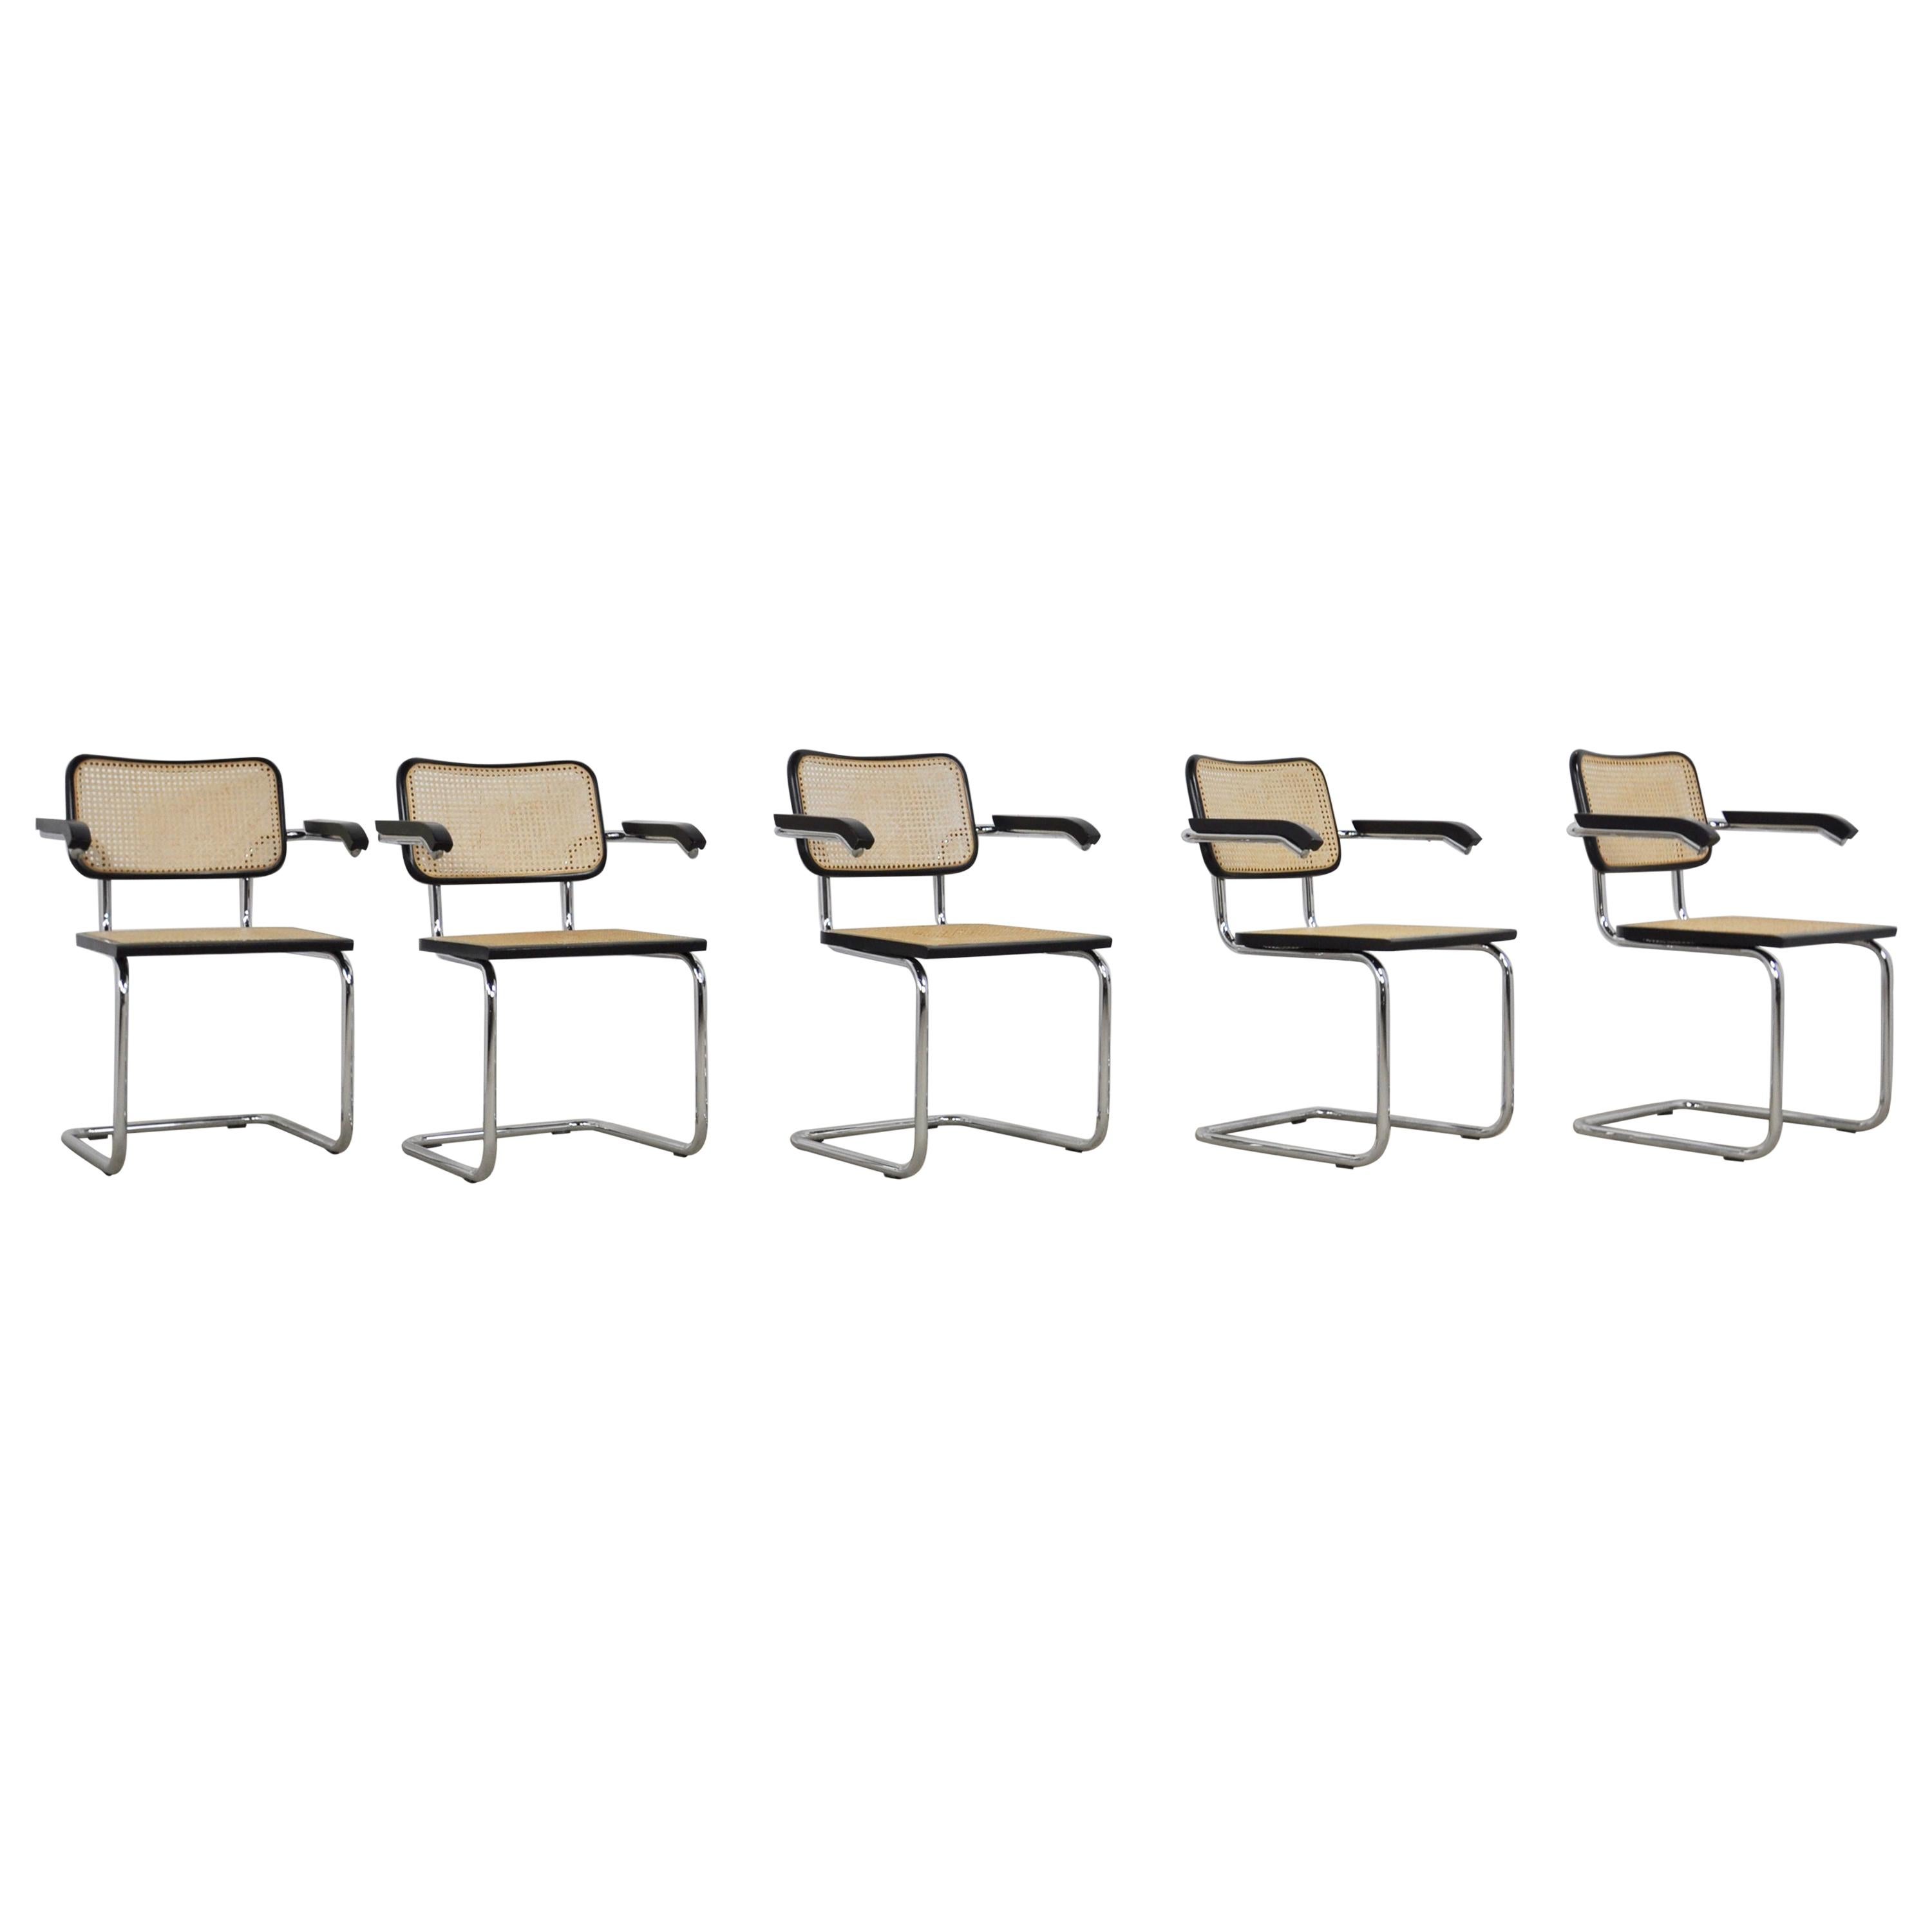 Dinning Style Chairs B32 by Marcel Breuer Set of 5